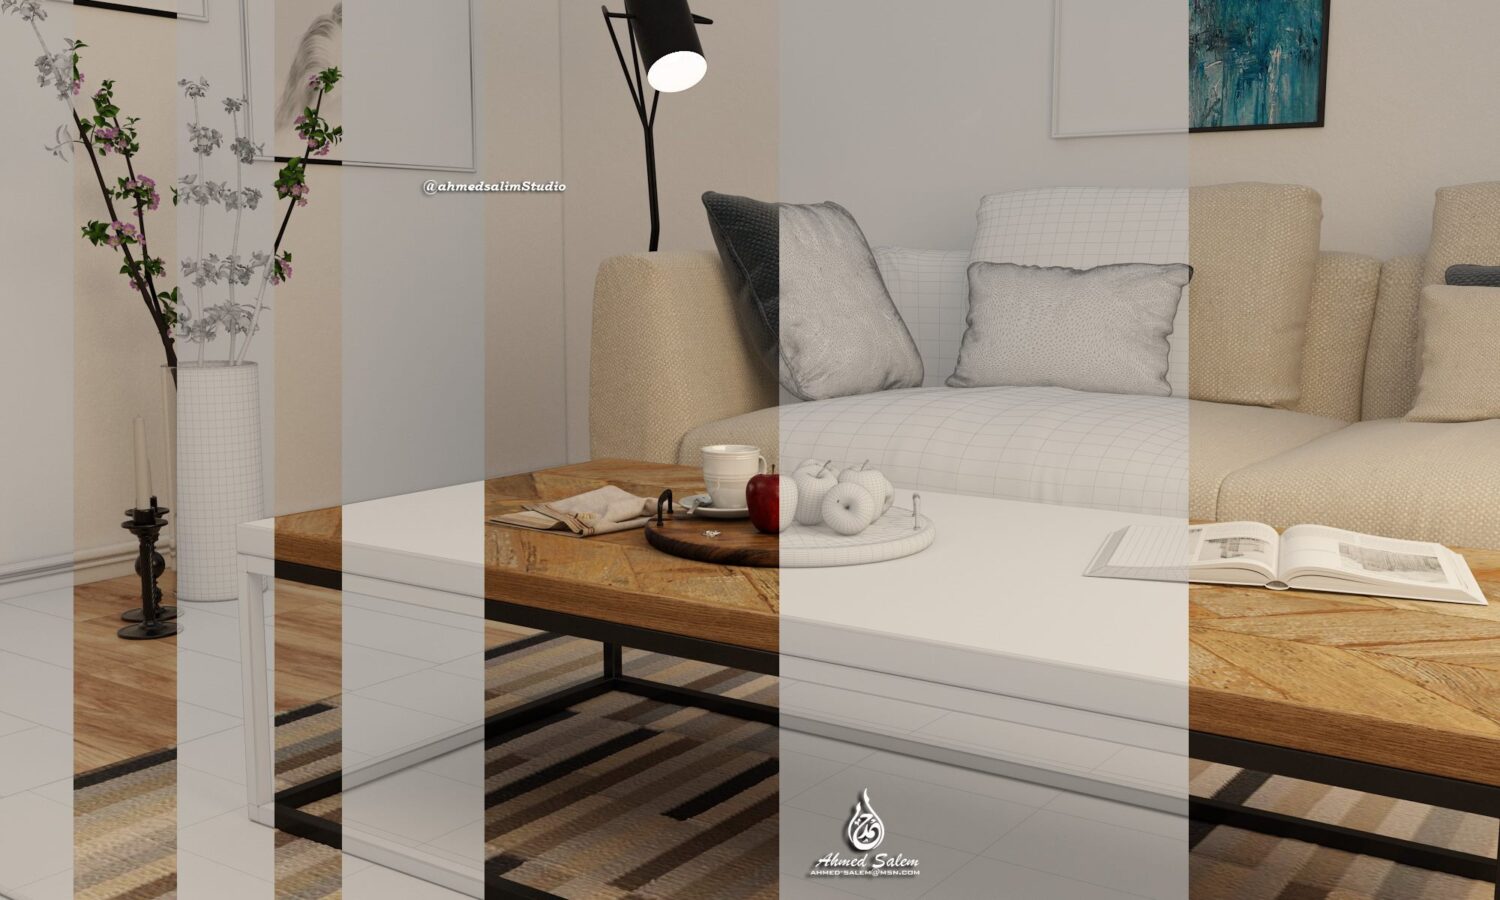 11088. Free 3D Interior Living Room Model Download By Ahmed Salim